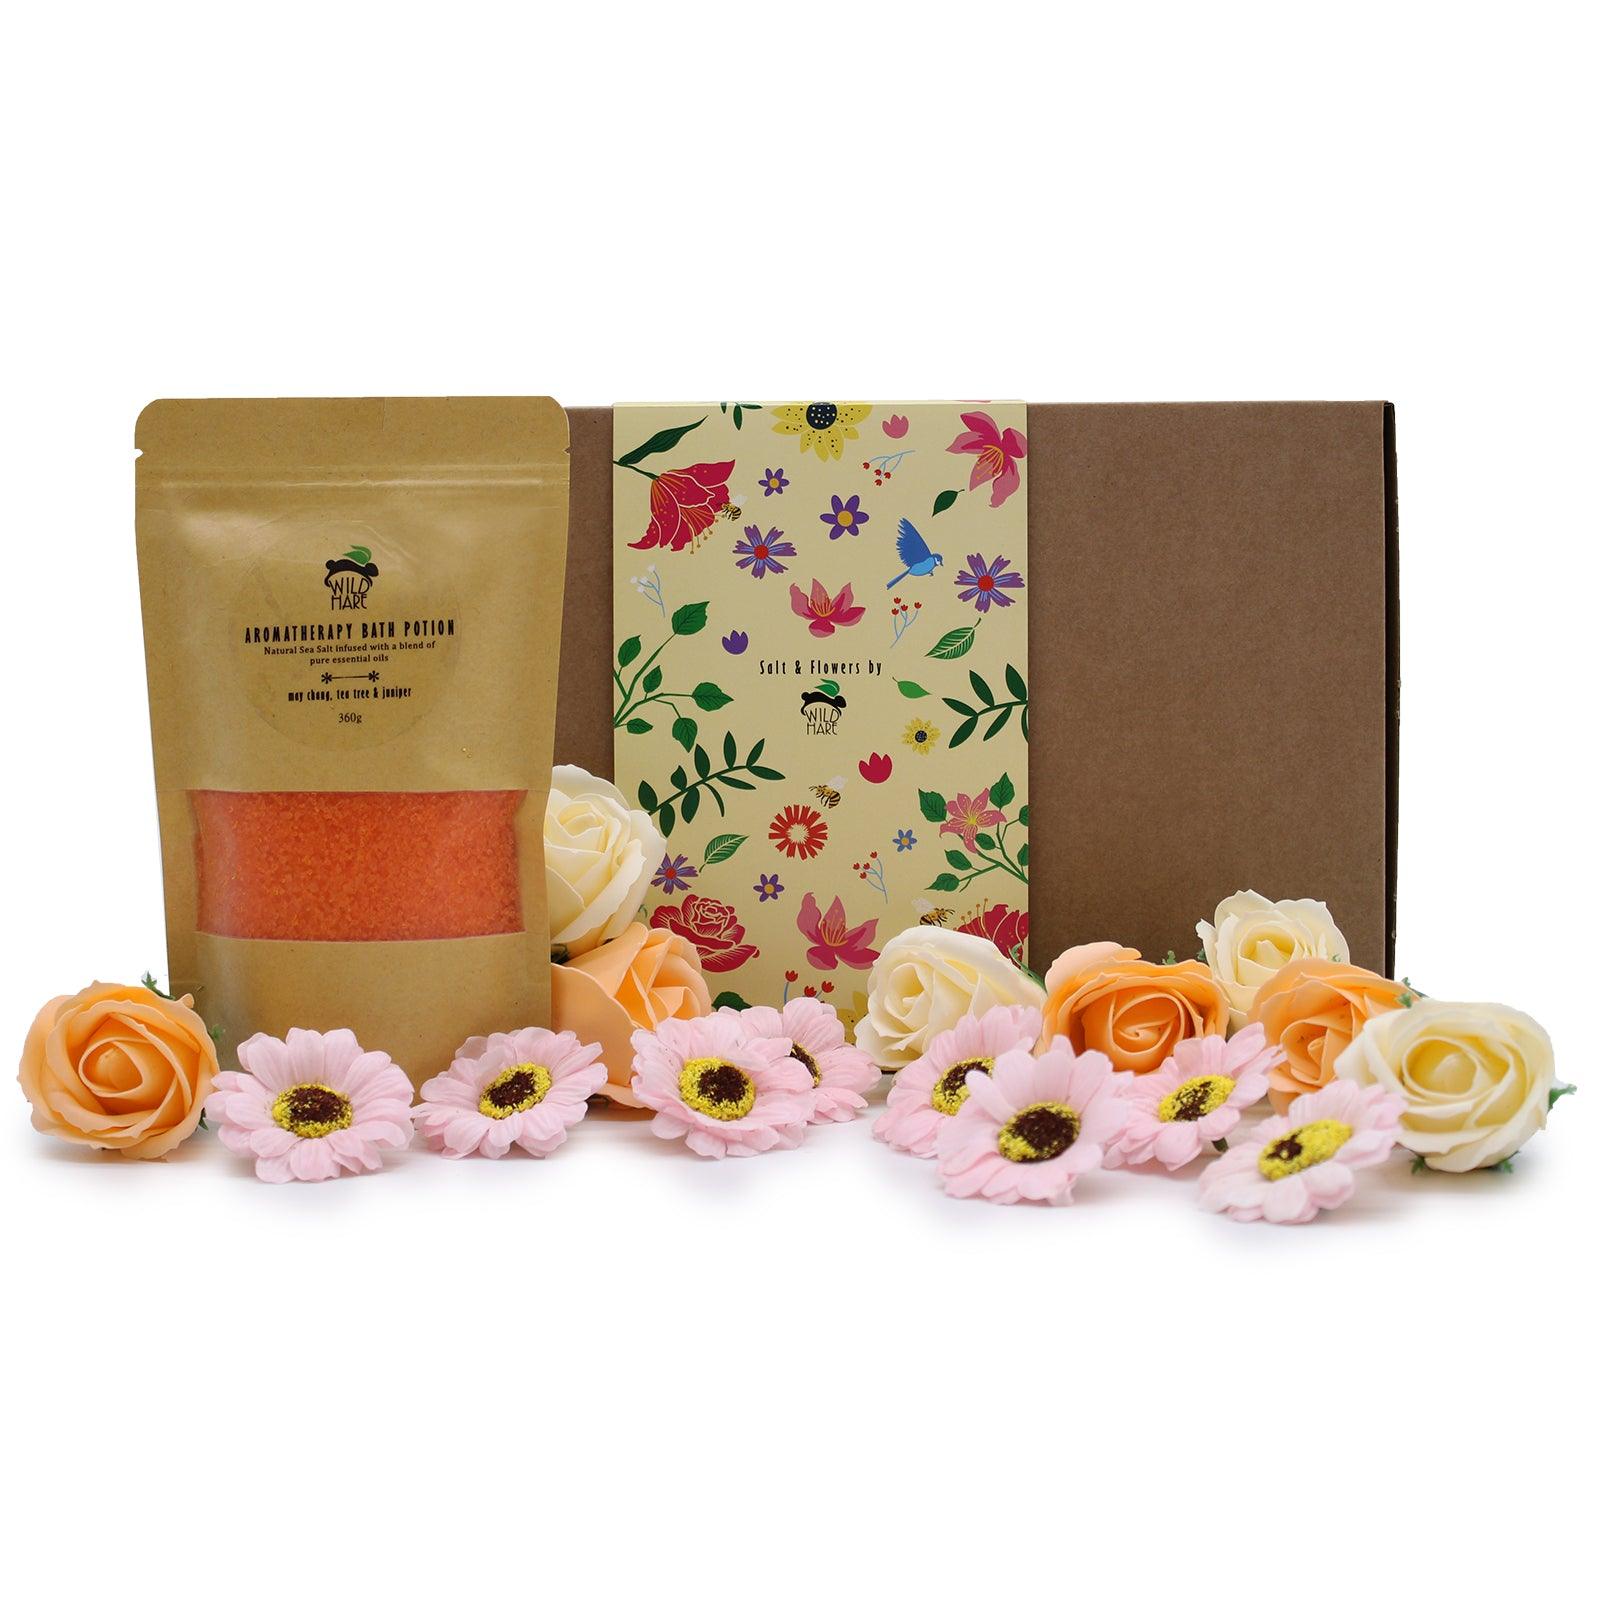 Salt and Flower Gift Sets - Charming Spaces